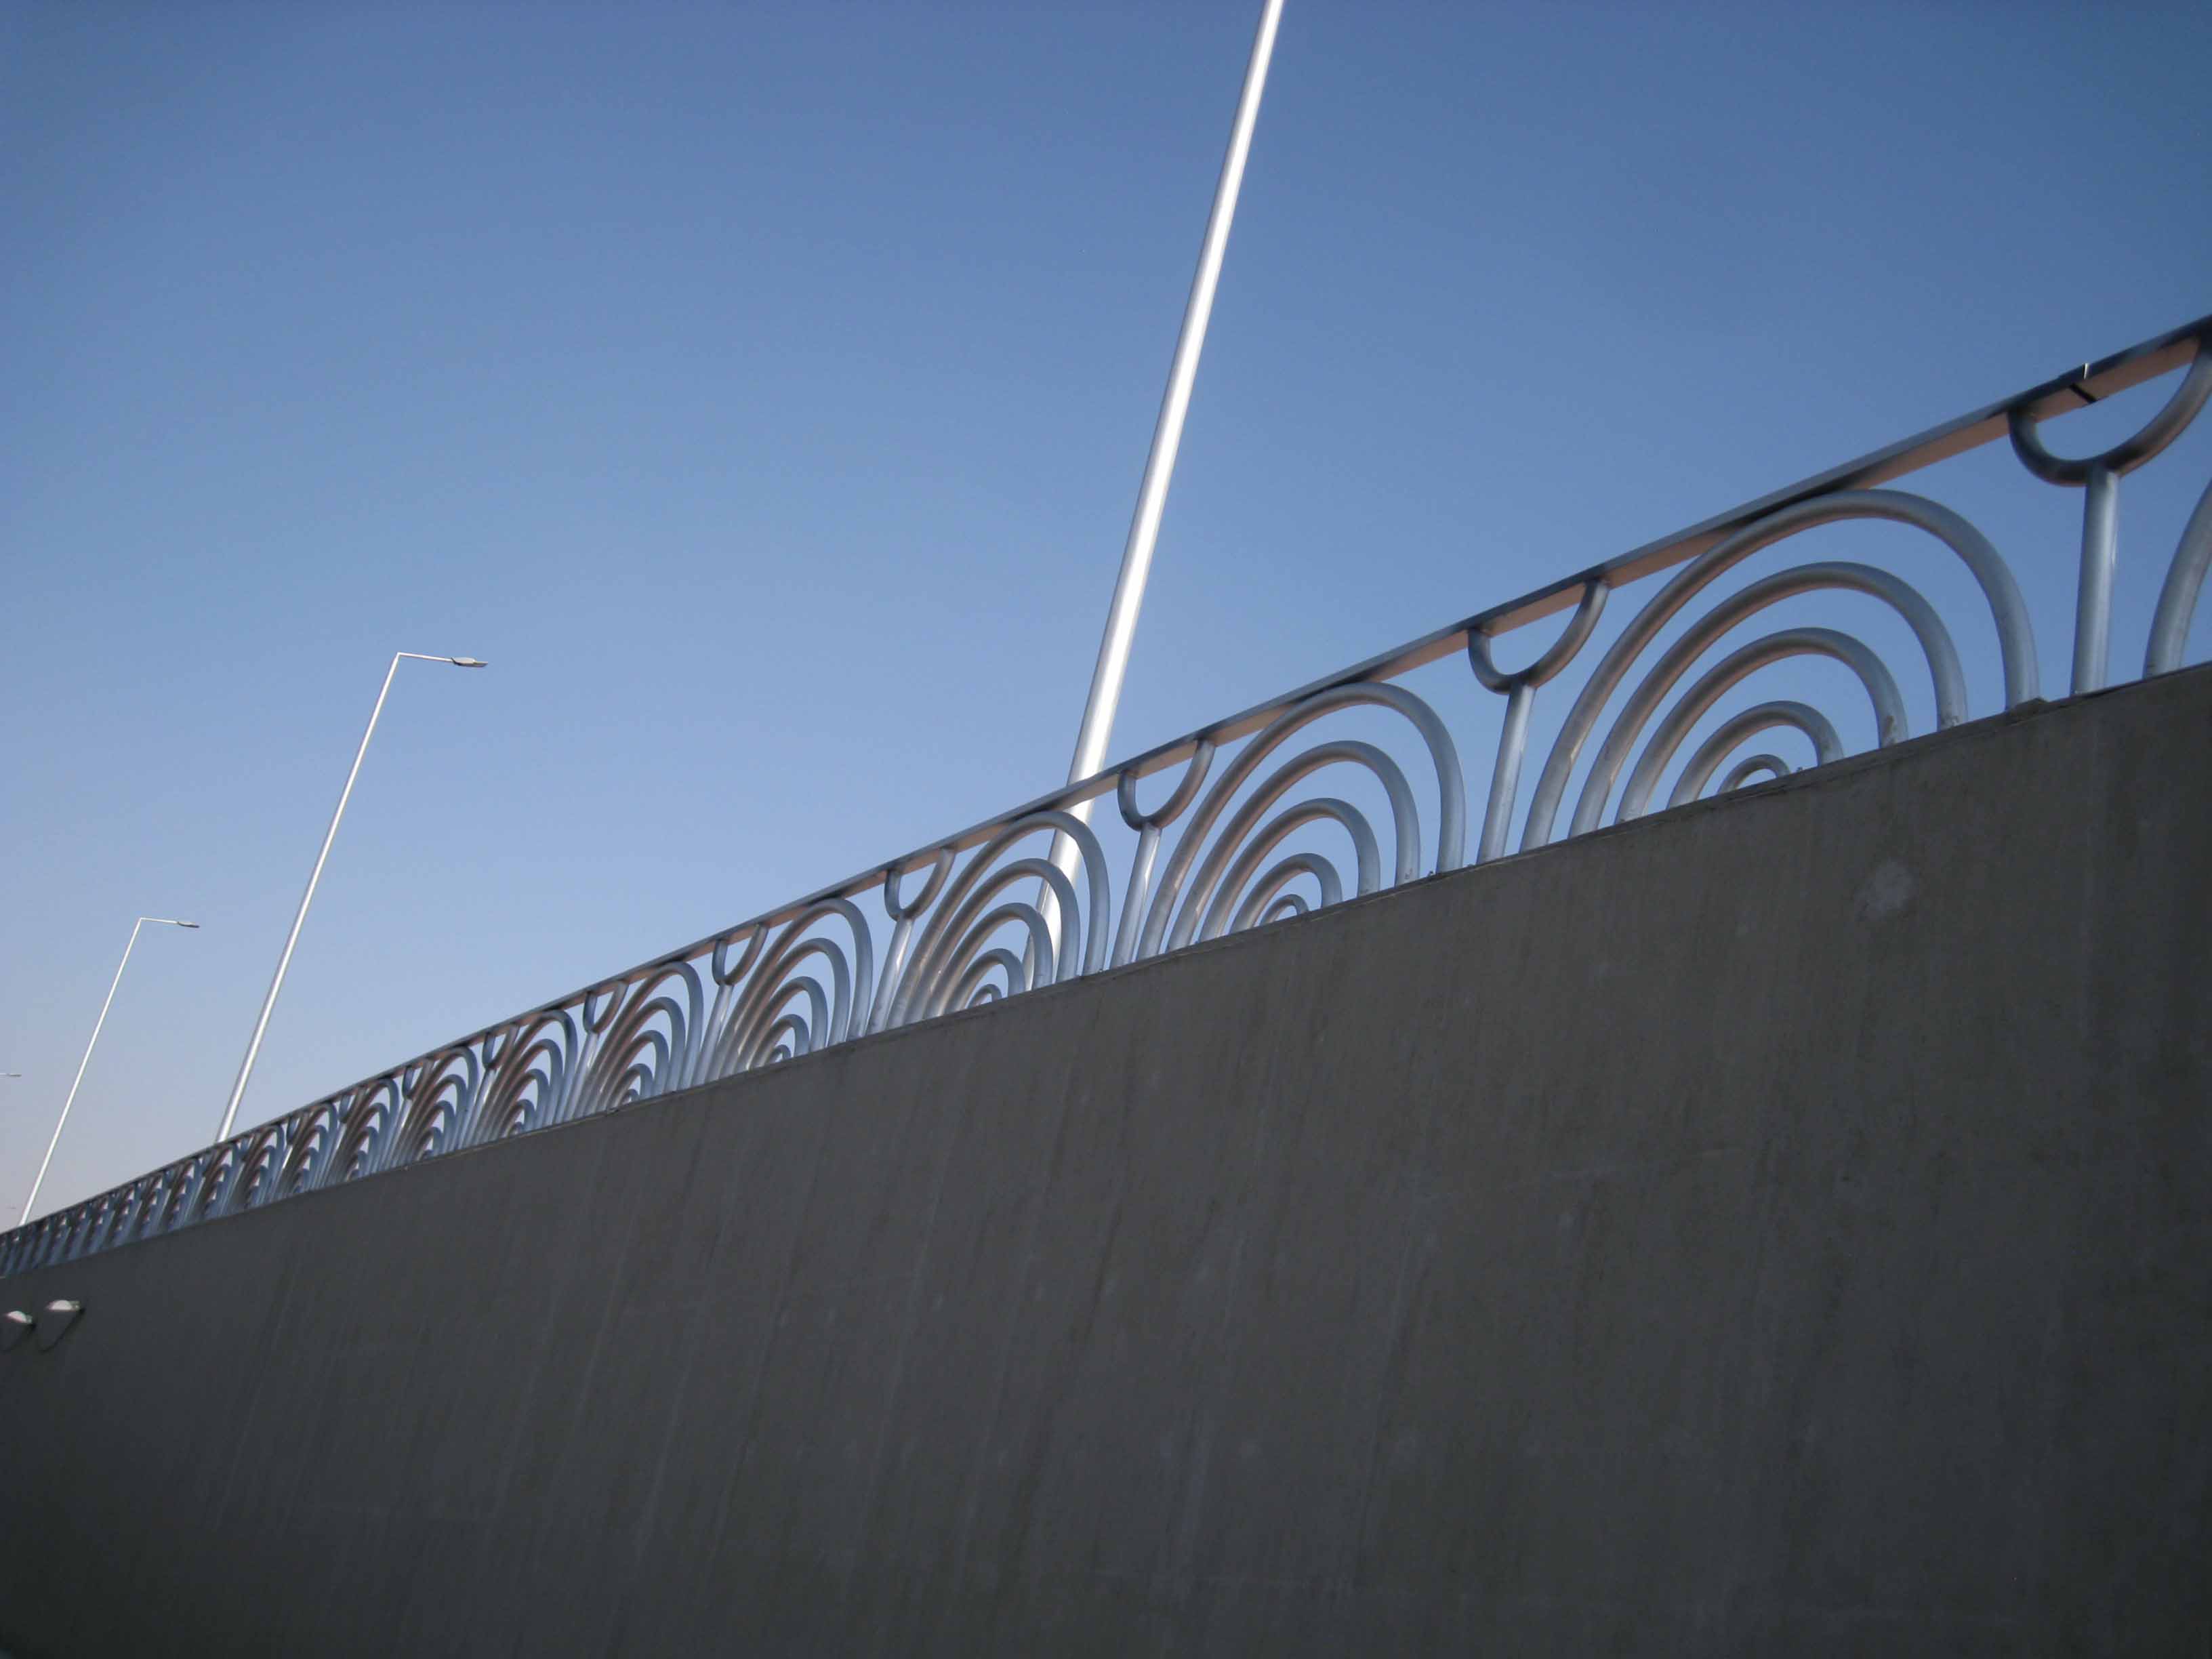 Handrail of Downtown tunnel project (18)